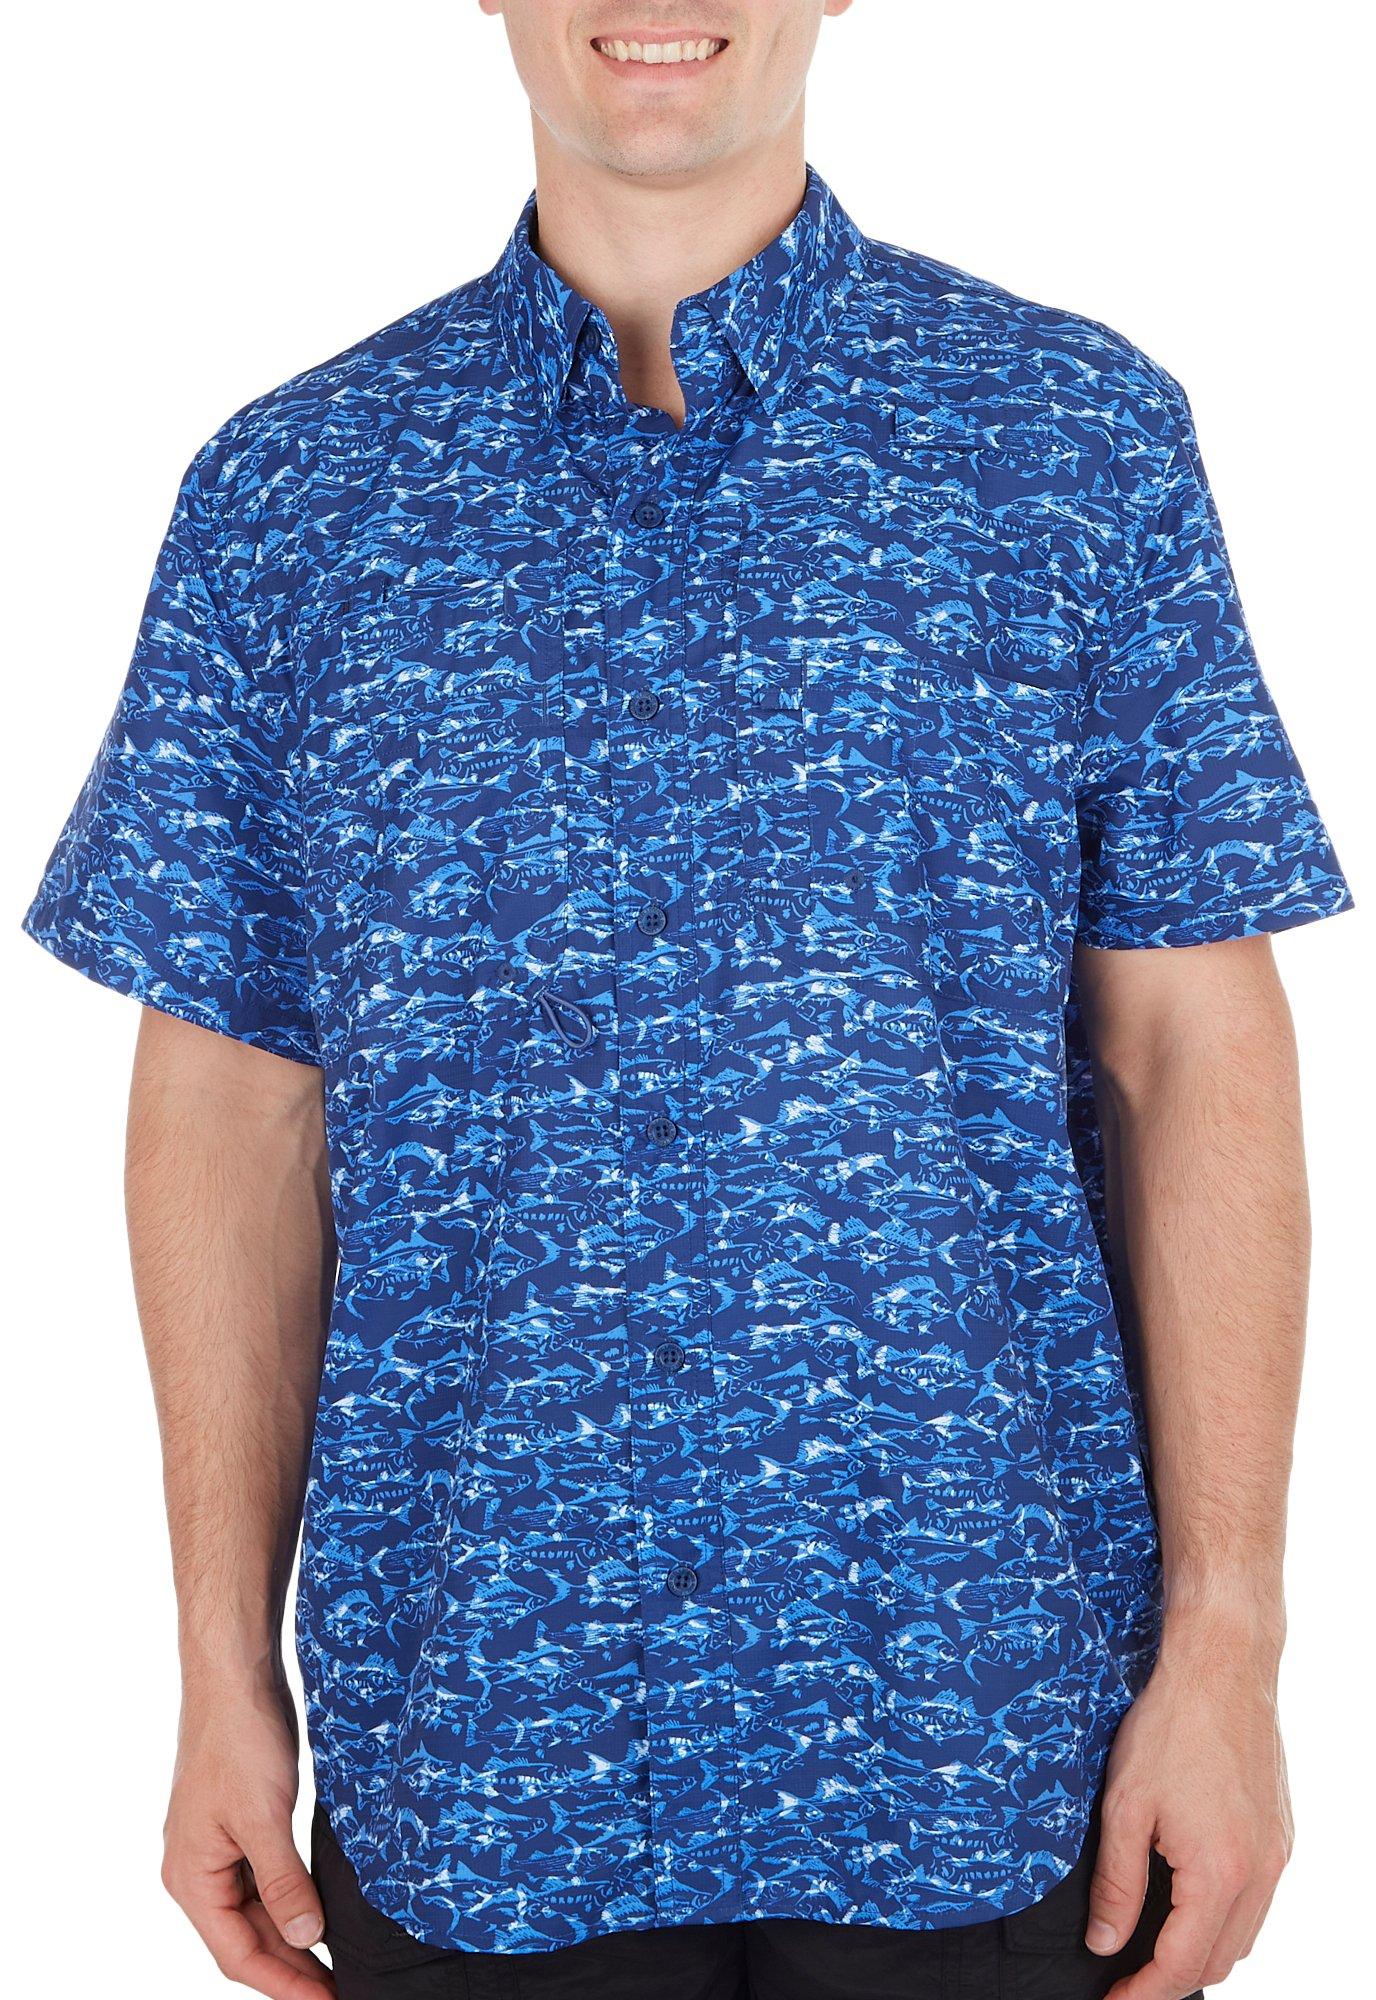  Reel Legends Mens Print Saltwater II Short Sleeve Shirt Small  Peach/Blue Multi : Clothing, Shoes & Jewelry